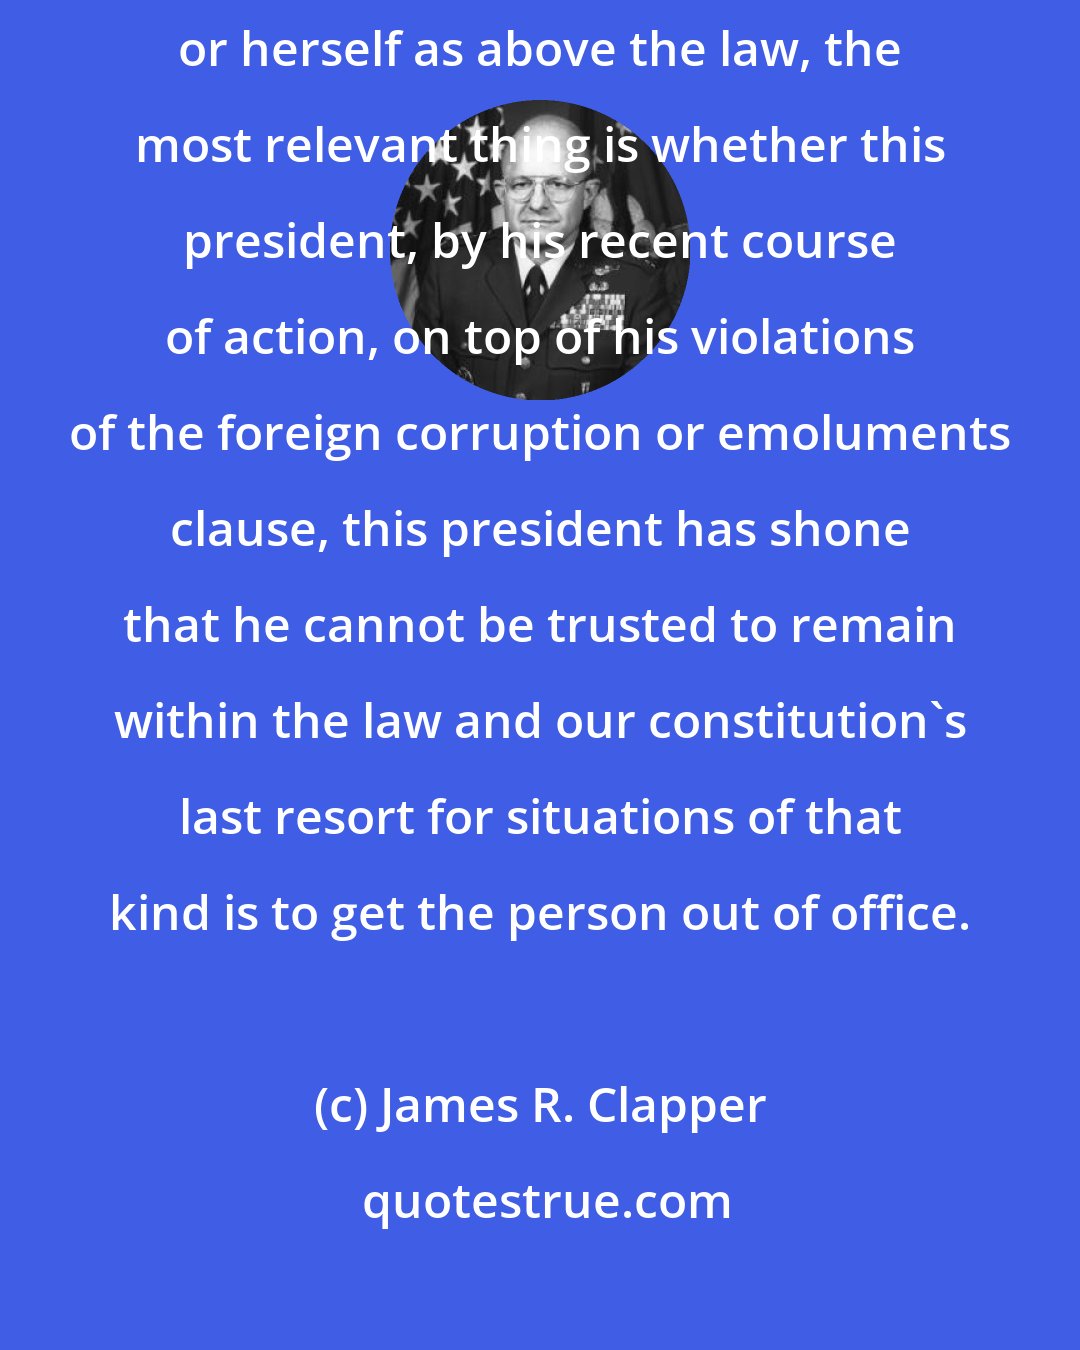 James R. Clapper: Impeachment is our system's last resort for someone who treats himself or herself as above the law, the most relevant thing is whether this president, by his recent course of action, on top of his violations of the foreign corruption or emoluments clause, this president has shone that he cannot be trusted to remain within the law and our constitution's last resort for situations of that kind is to get the person out of office.